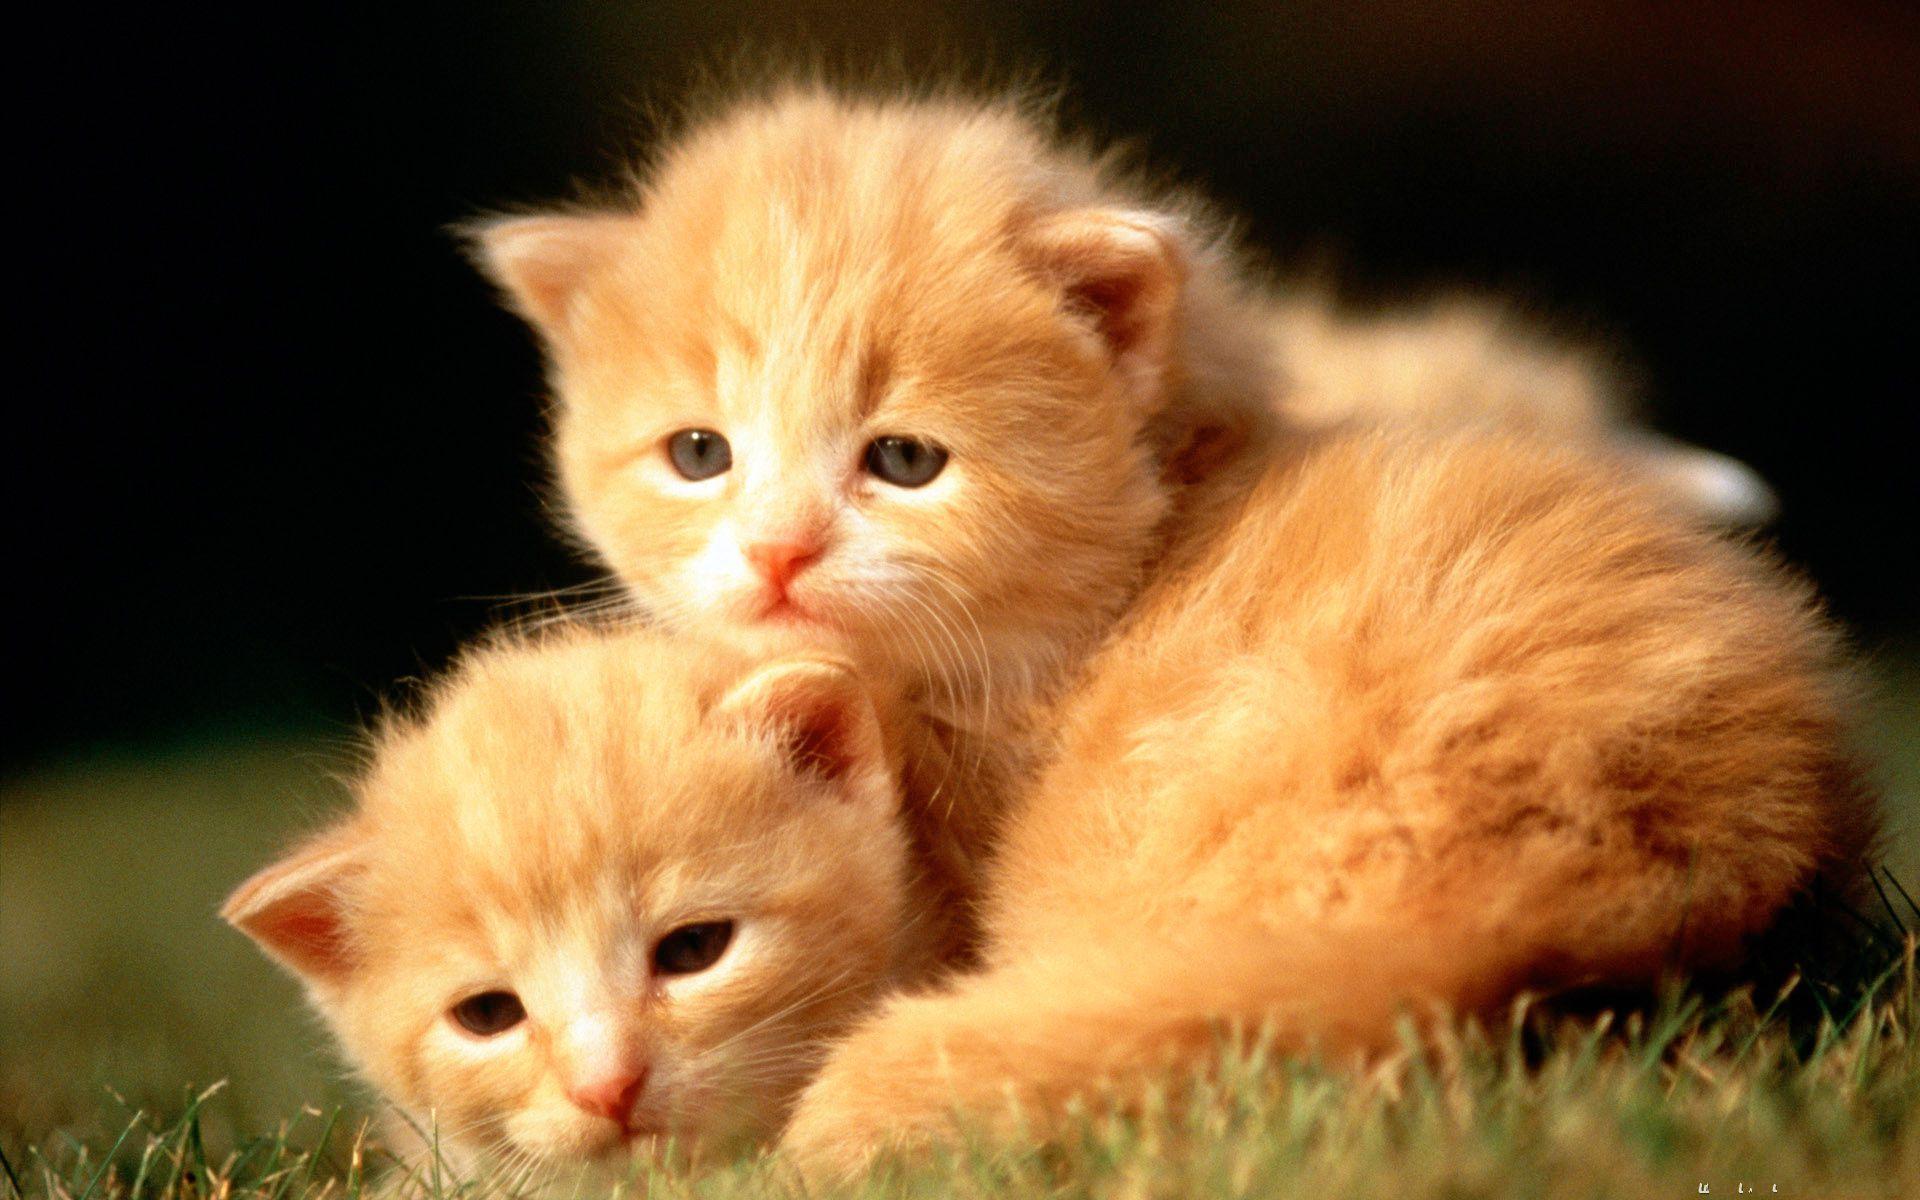 cute baby animal picture wallpaper Wallpaper 100% High Quality